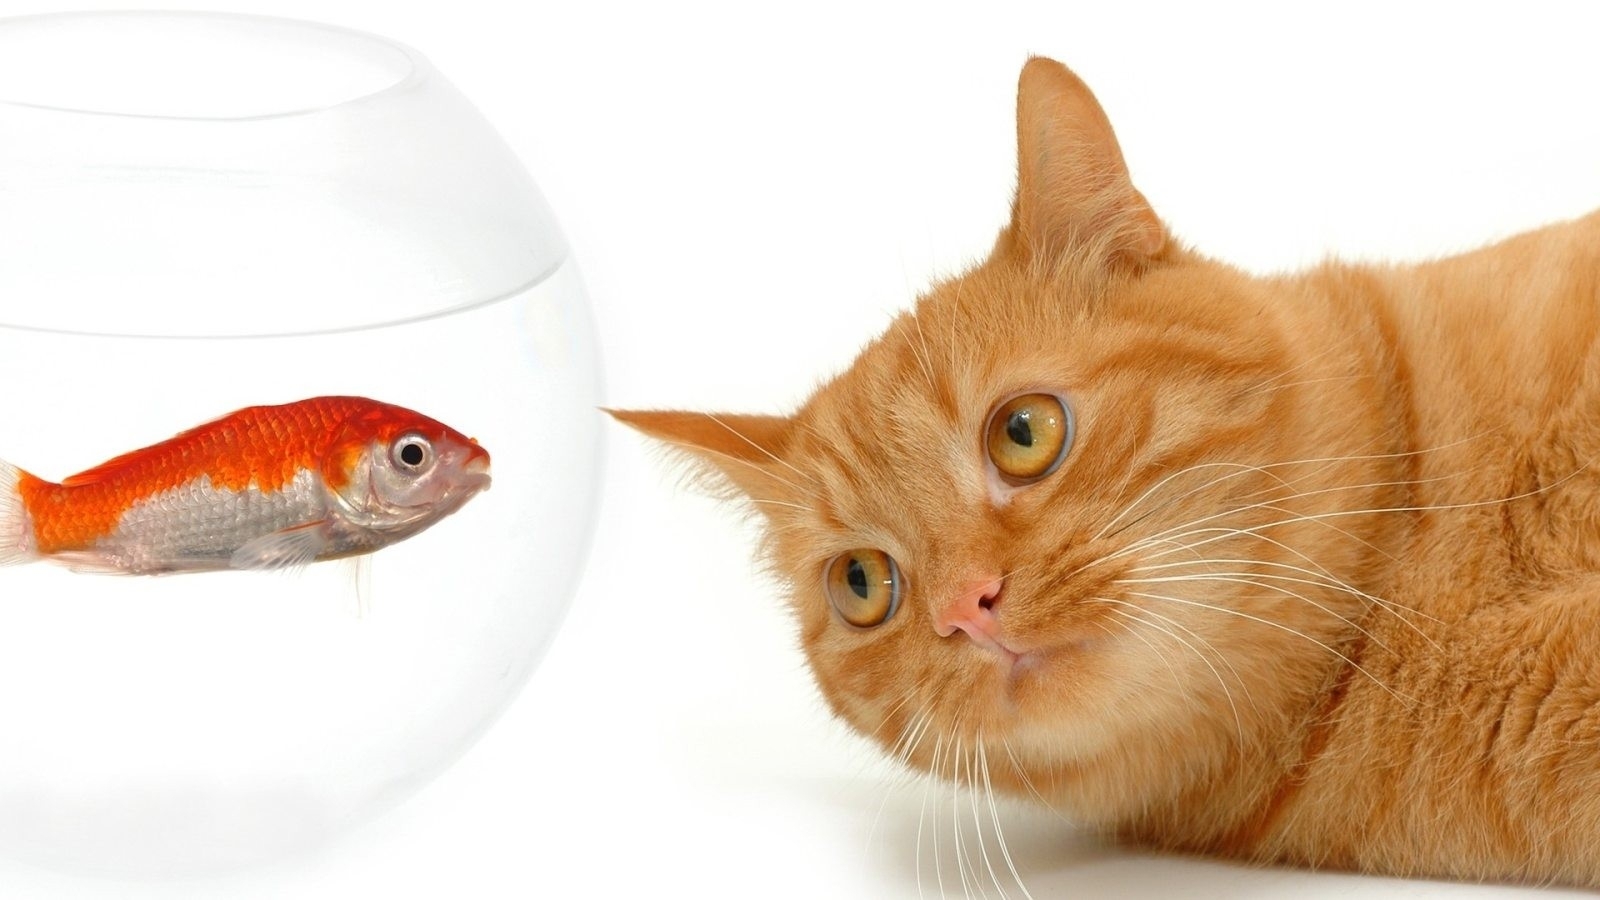 animals, Fishes, Cats, Felines, Face, Eyes, Humor, Funny, Cute, Contrast, Color Wallpaper